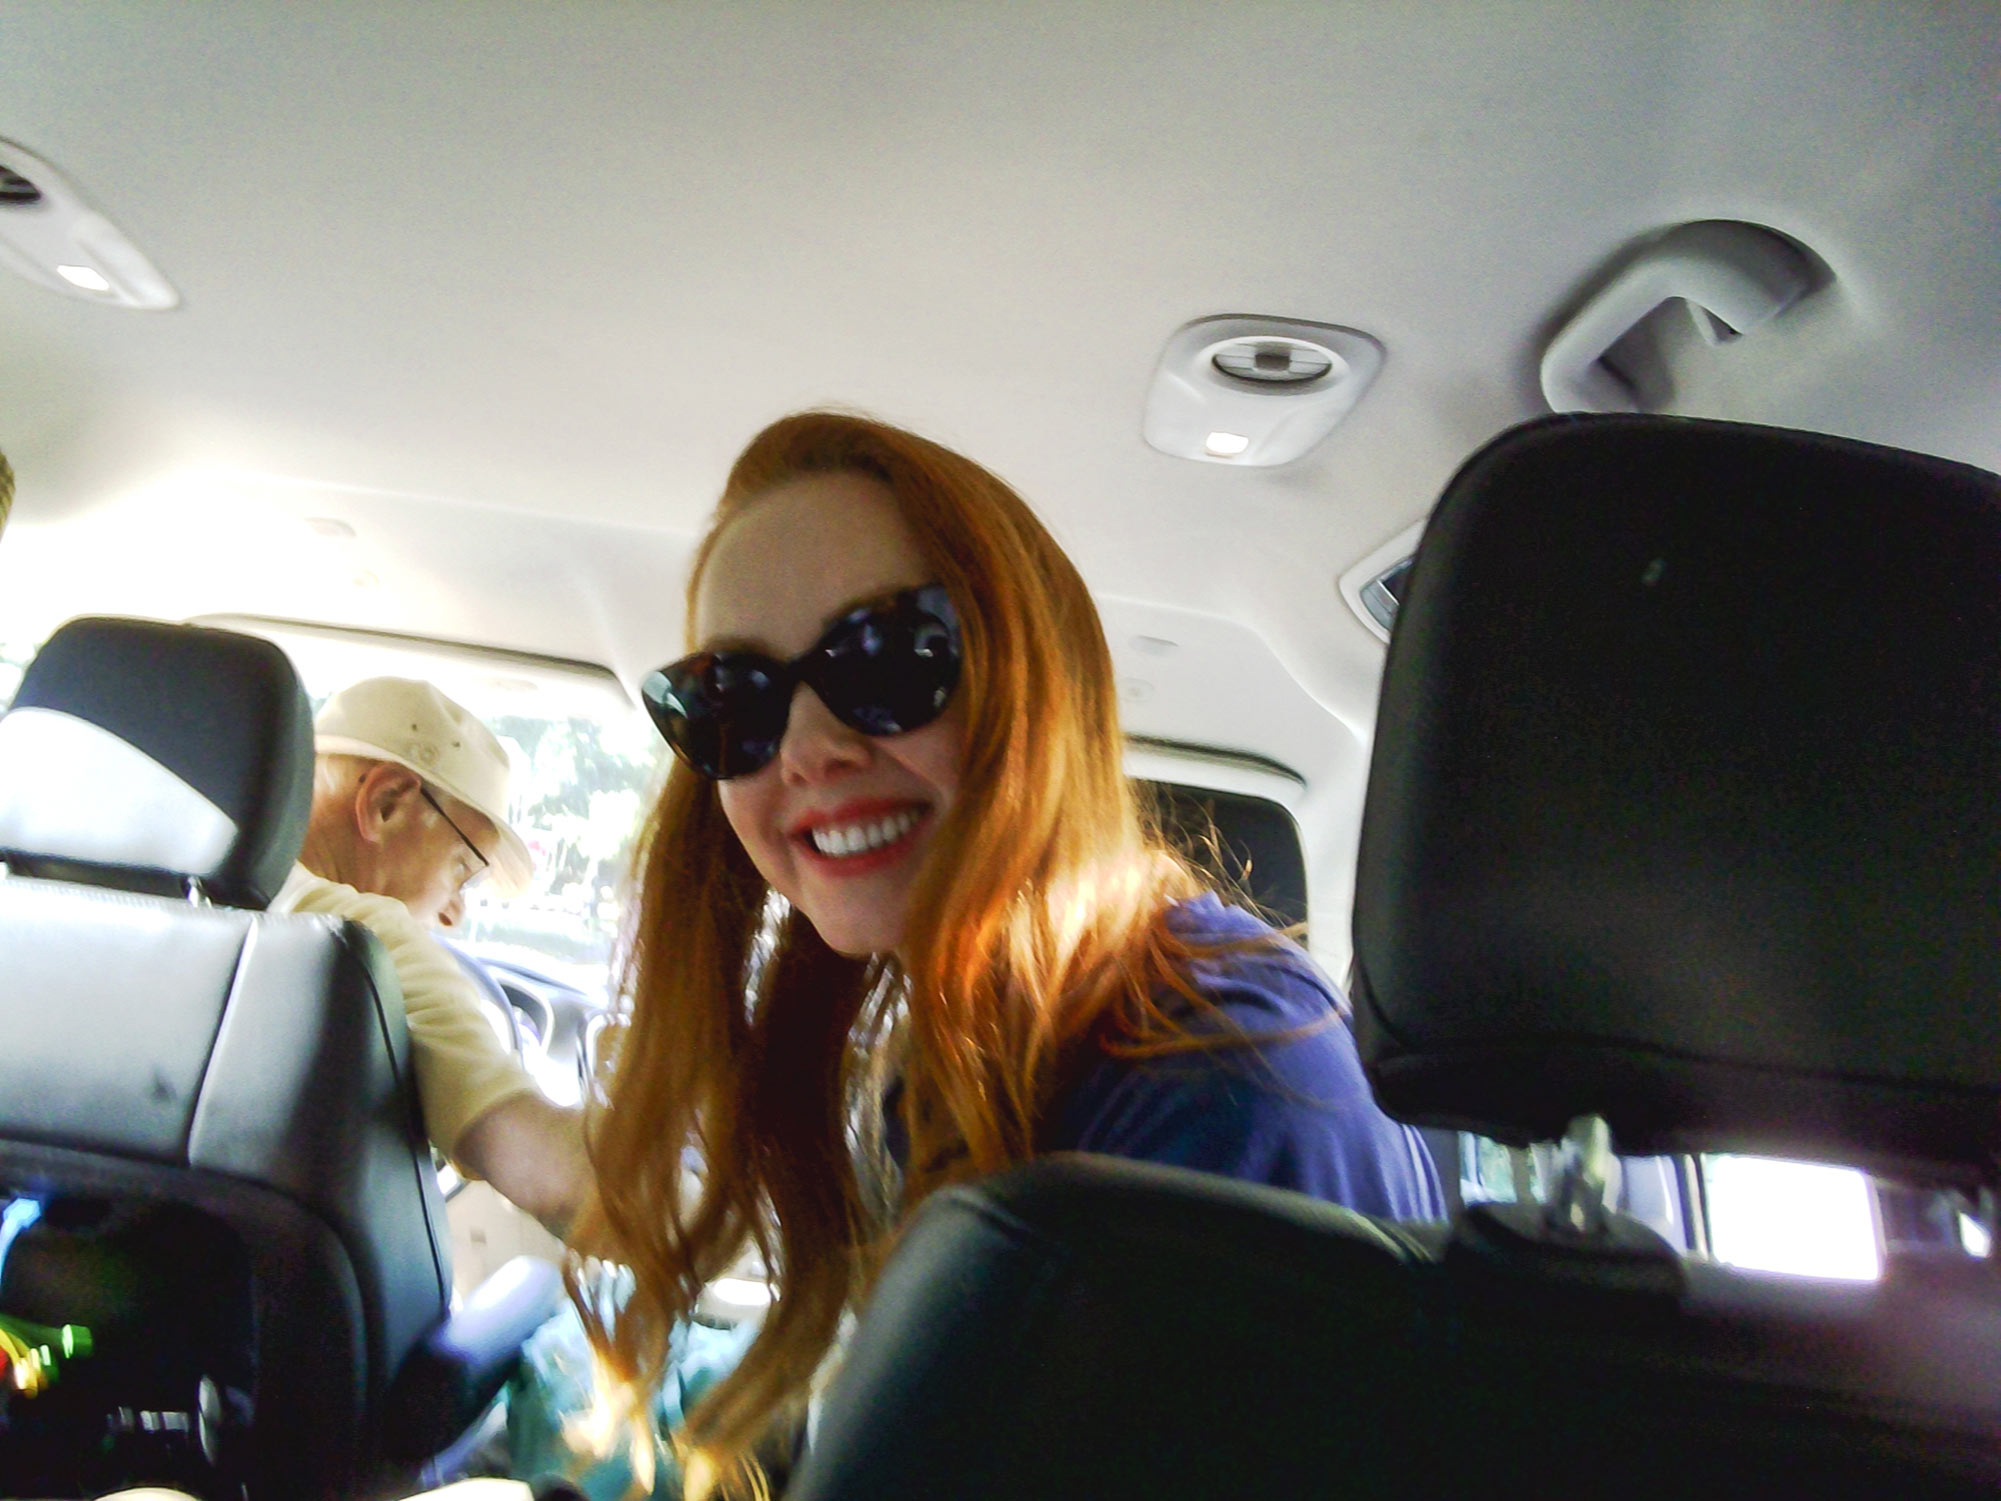 Amber looks round from the passenger sear of a car. She is smiling and wearing dark glasses.